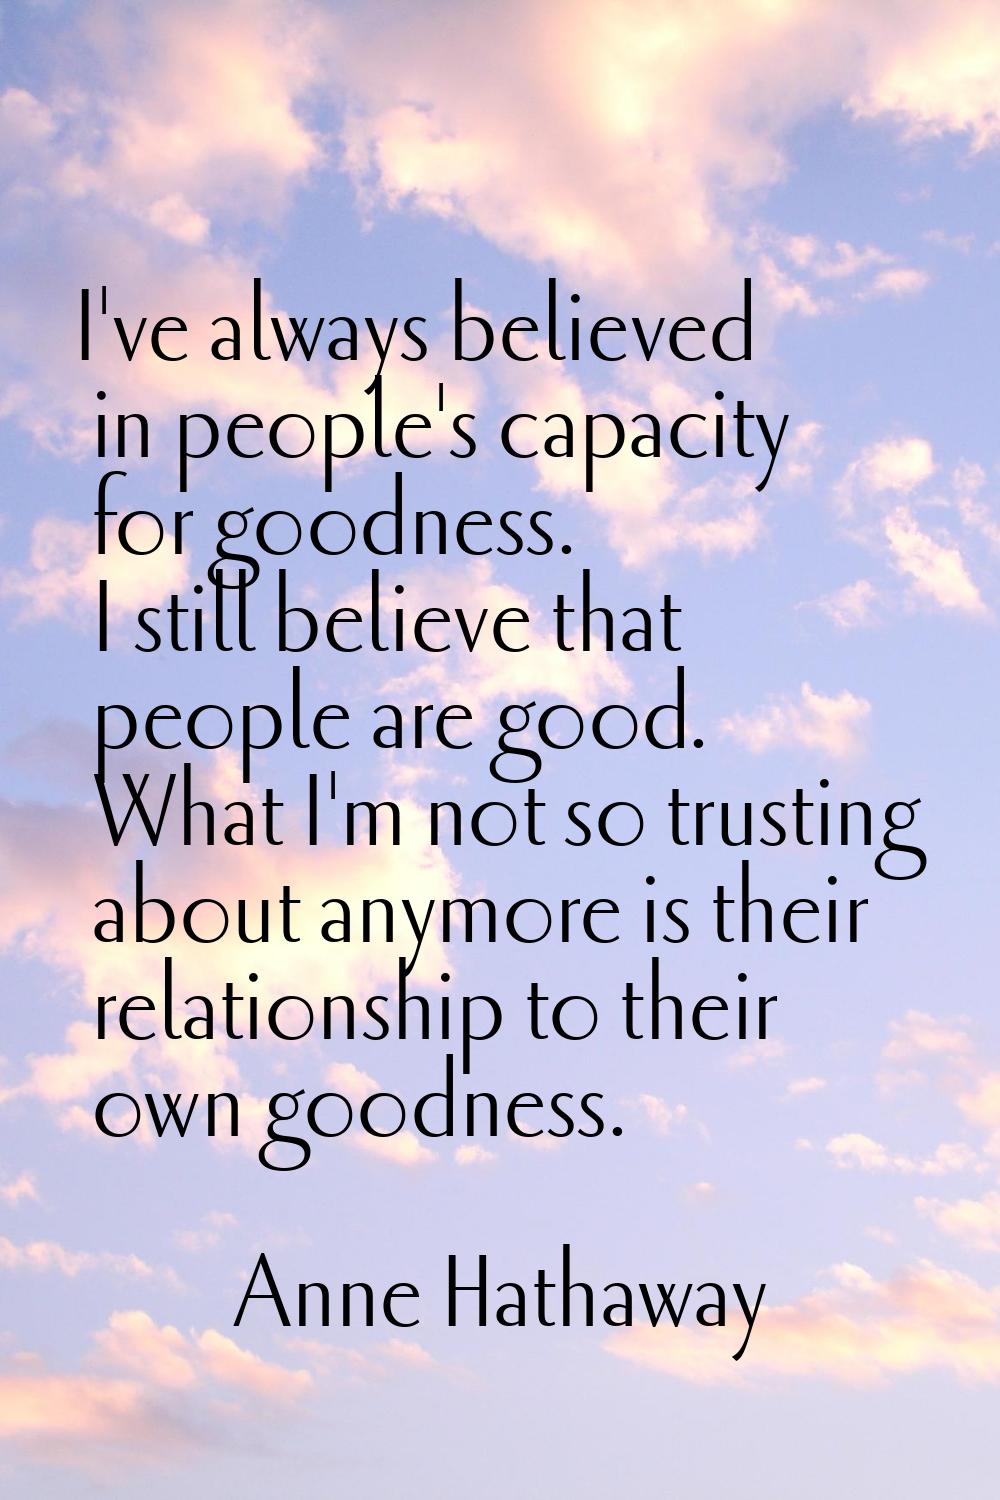 I've always believed in people's capacity for goodness. I still believe that people are good. What 